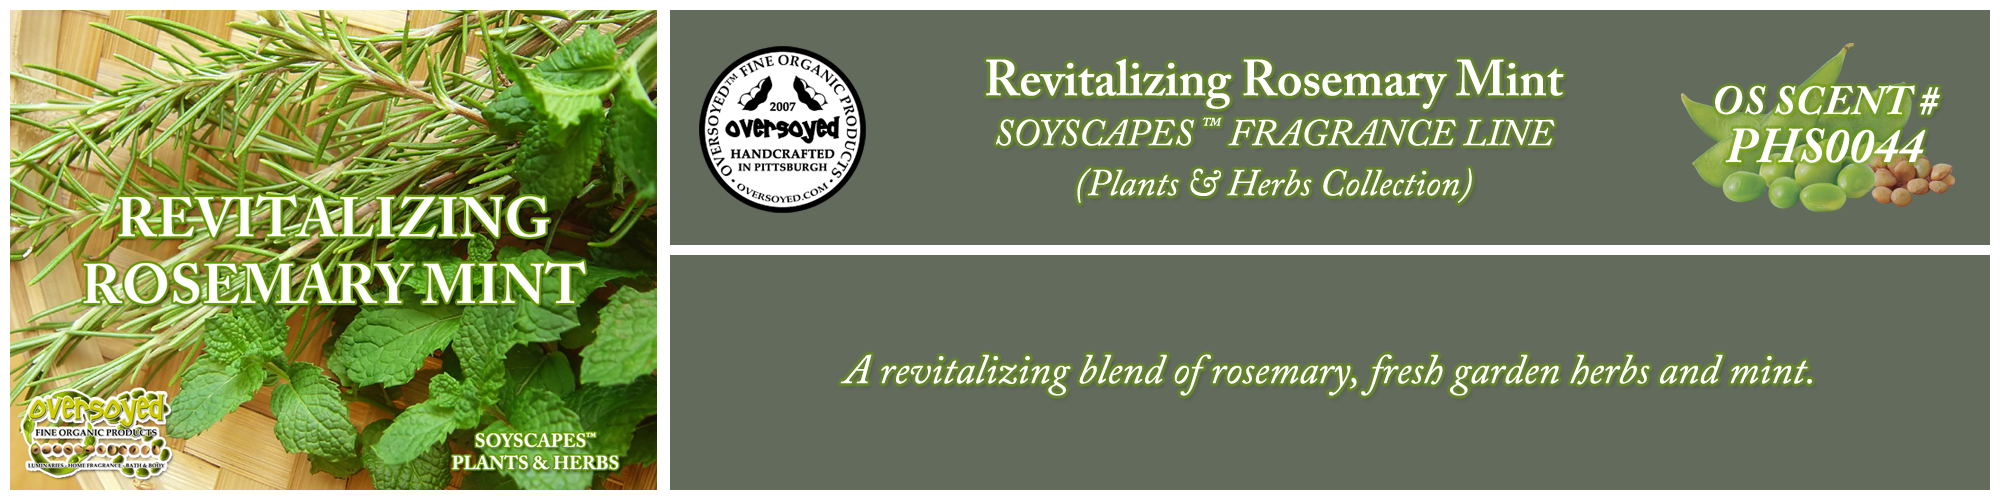 Revitalizing Rosemary Mint Handcrafted Products Collection